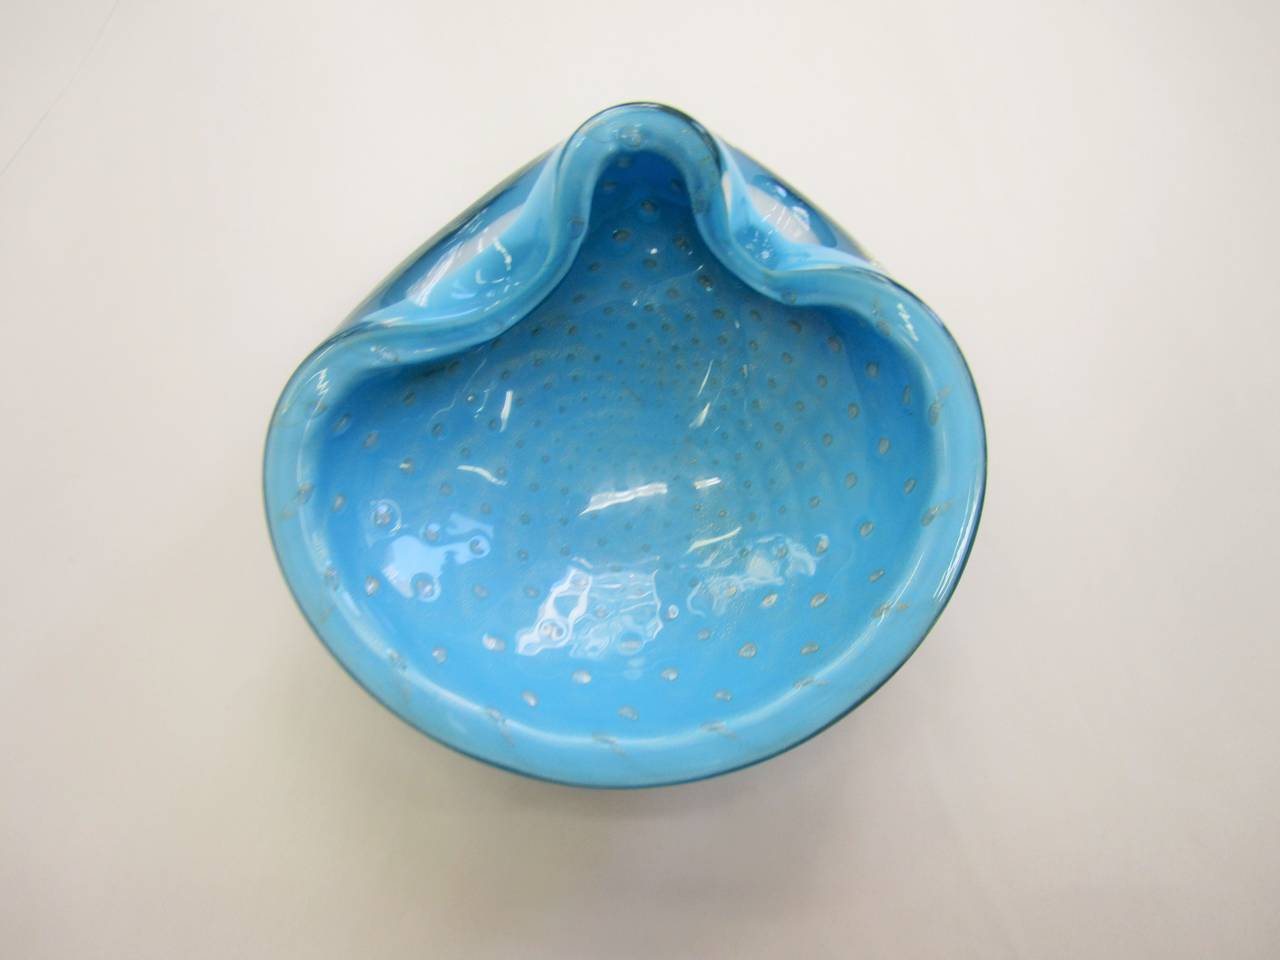 A beautiful and substantial Mid-20th century Italian Murano art glass bowl in powder blue with controlled bubble and silver fleck design, after designer Alfredo Barbini, circa 1960s, Italy. 

Measures: 5